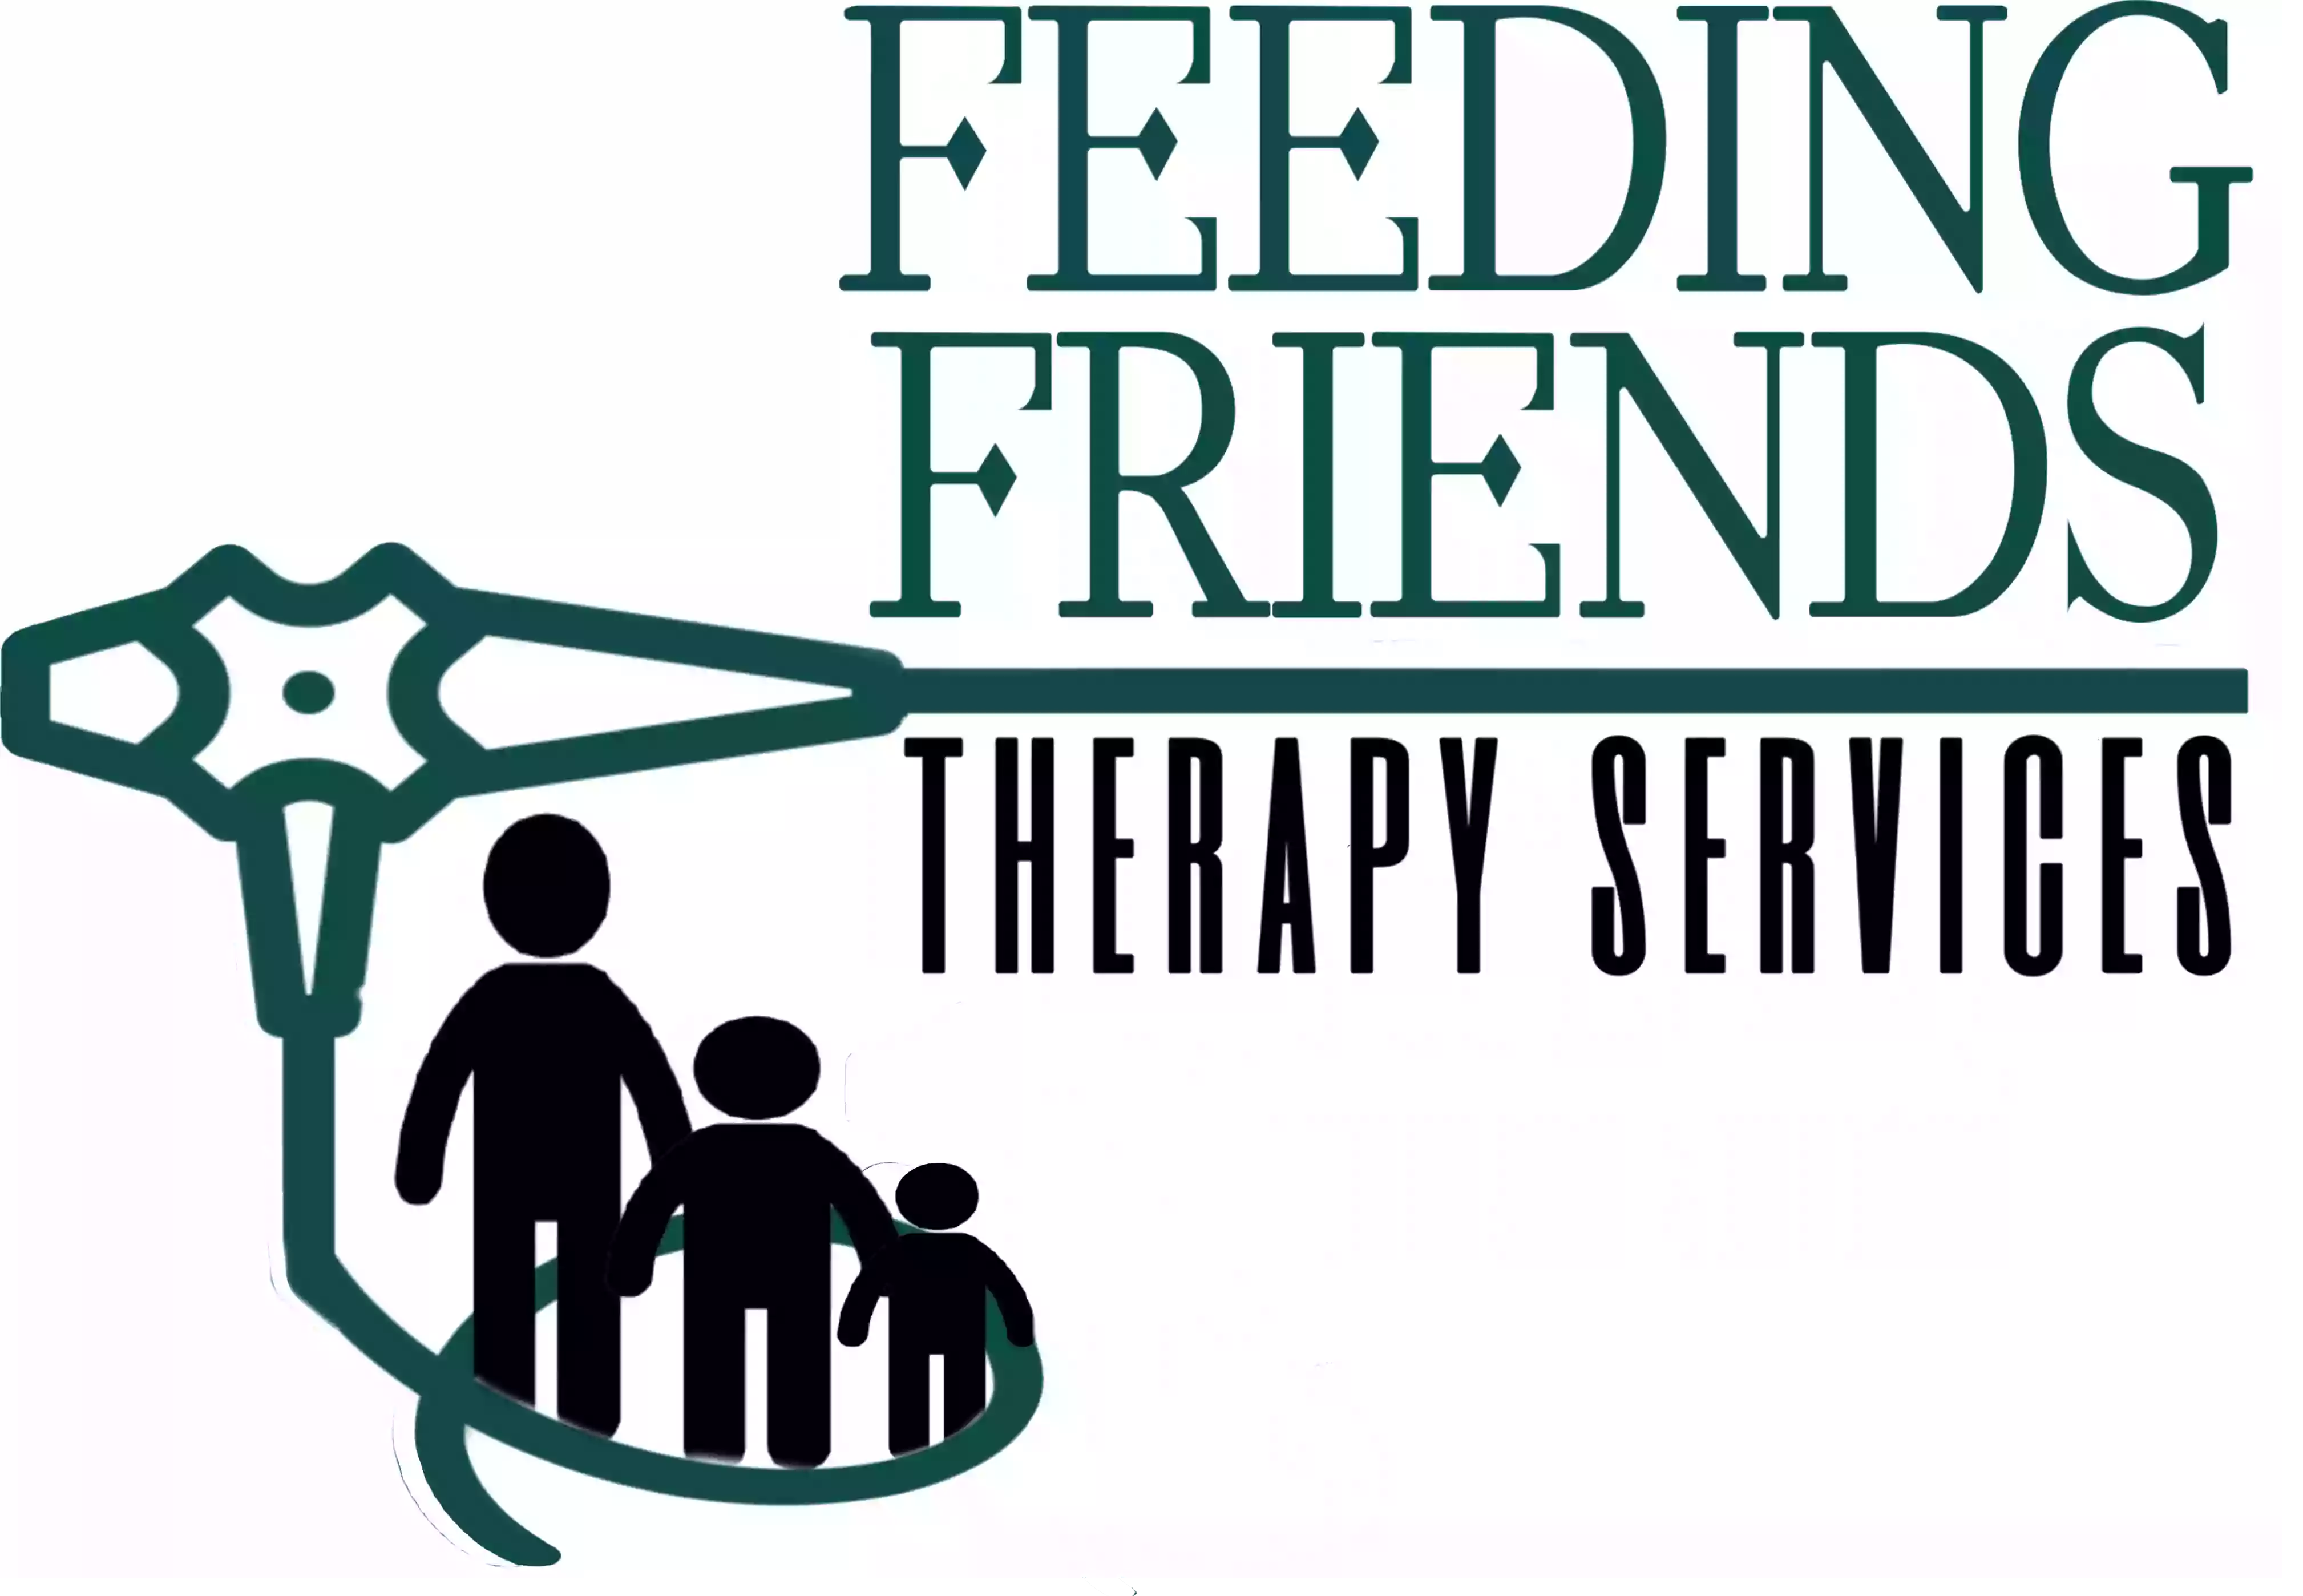 Feeding Friends Therapy Services